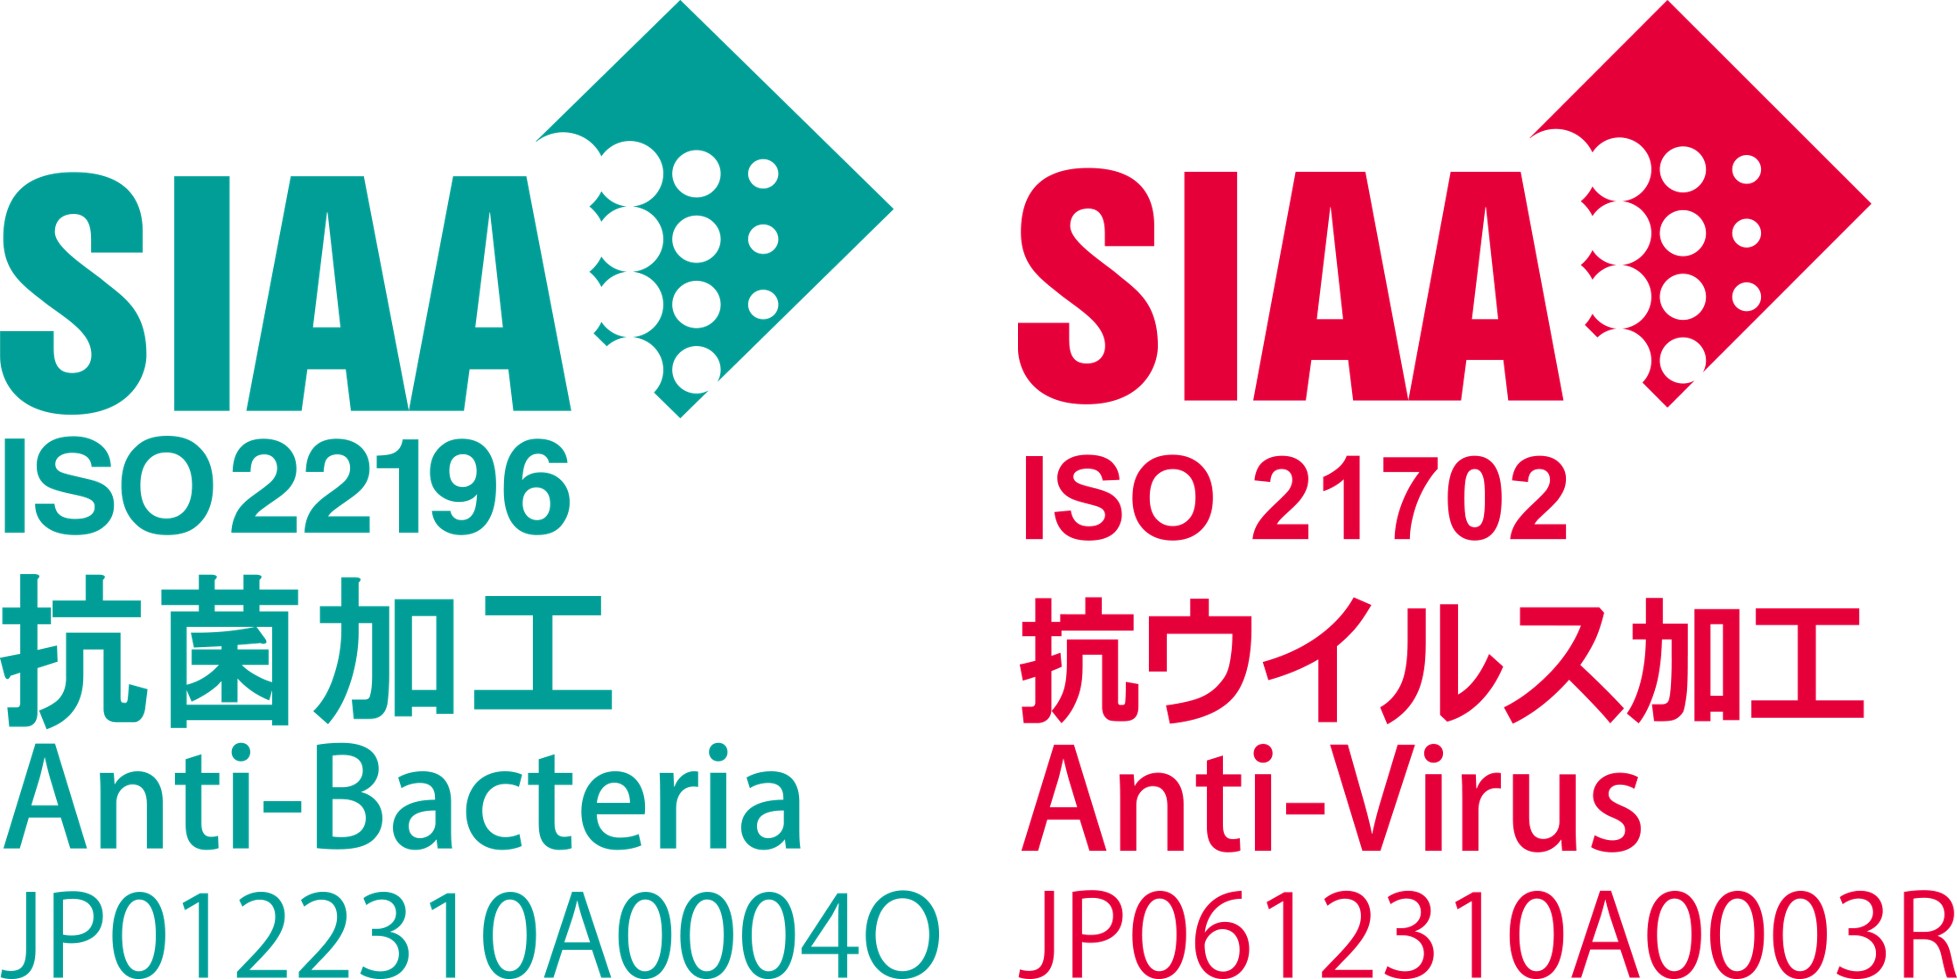 Products with the SIAA marks shown have been evaluated in accordance with ISO 22196 and ISO 21702 standards; this means product quality is controlled and information disclosed under the SIAA guidelines. [Source: Mitsubishi Electric Corporation]